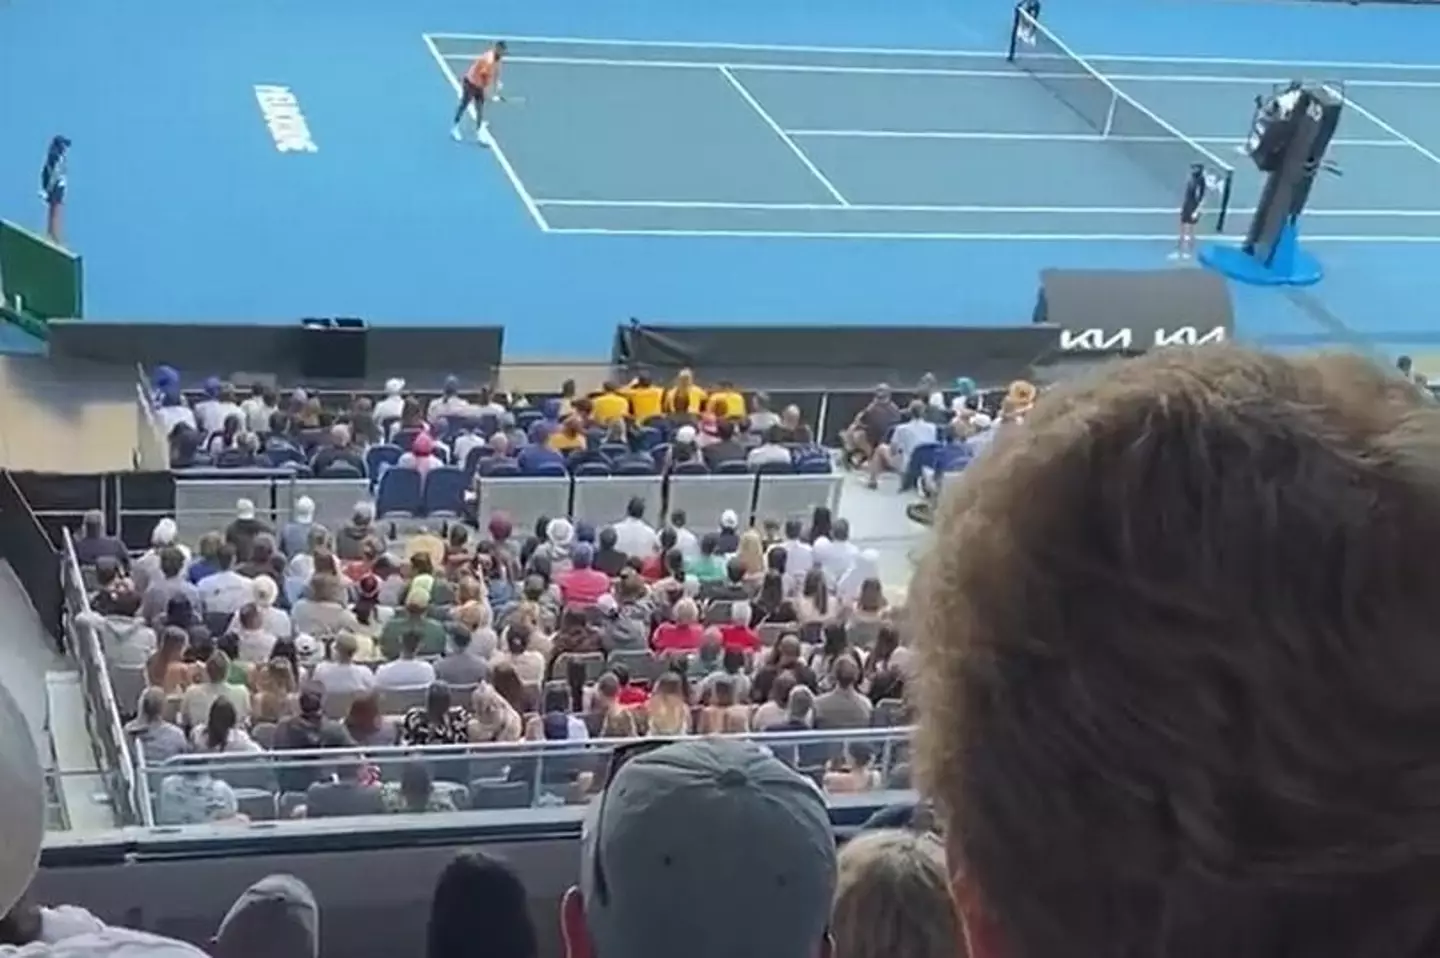 Tennis/hot dog enthusiasts on social media are kicking off over anything but the weekend's Austrian open matches.